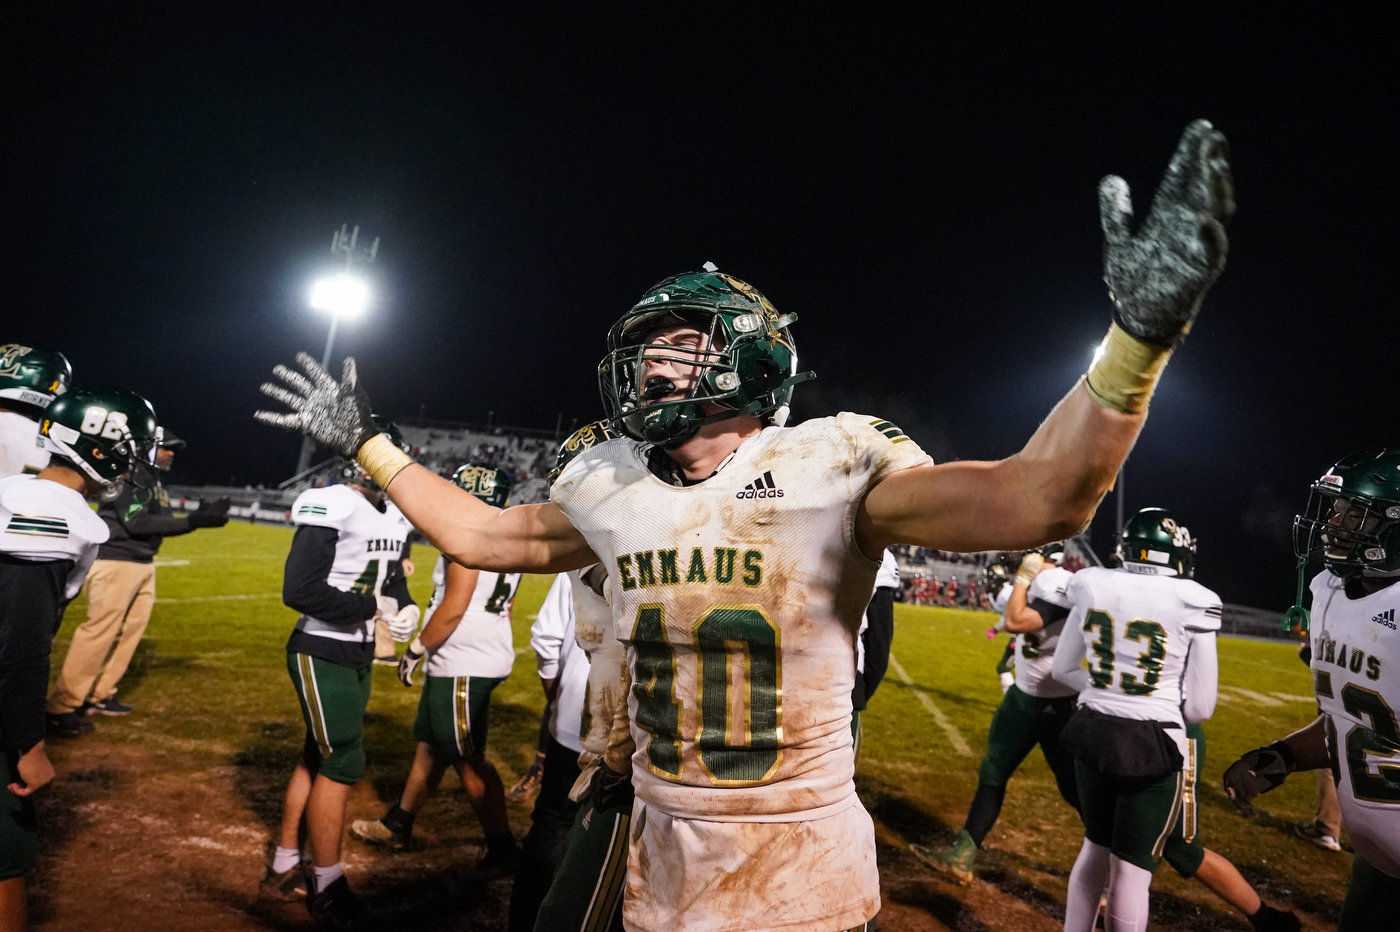 Emmaus, Freedom football are 1-3 but still are not to be overlooked